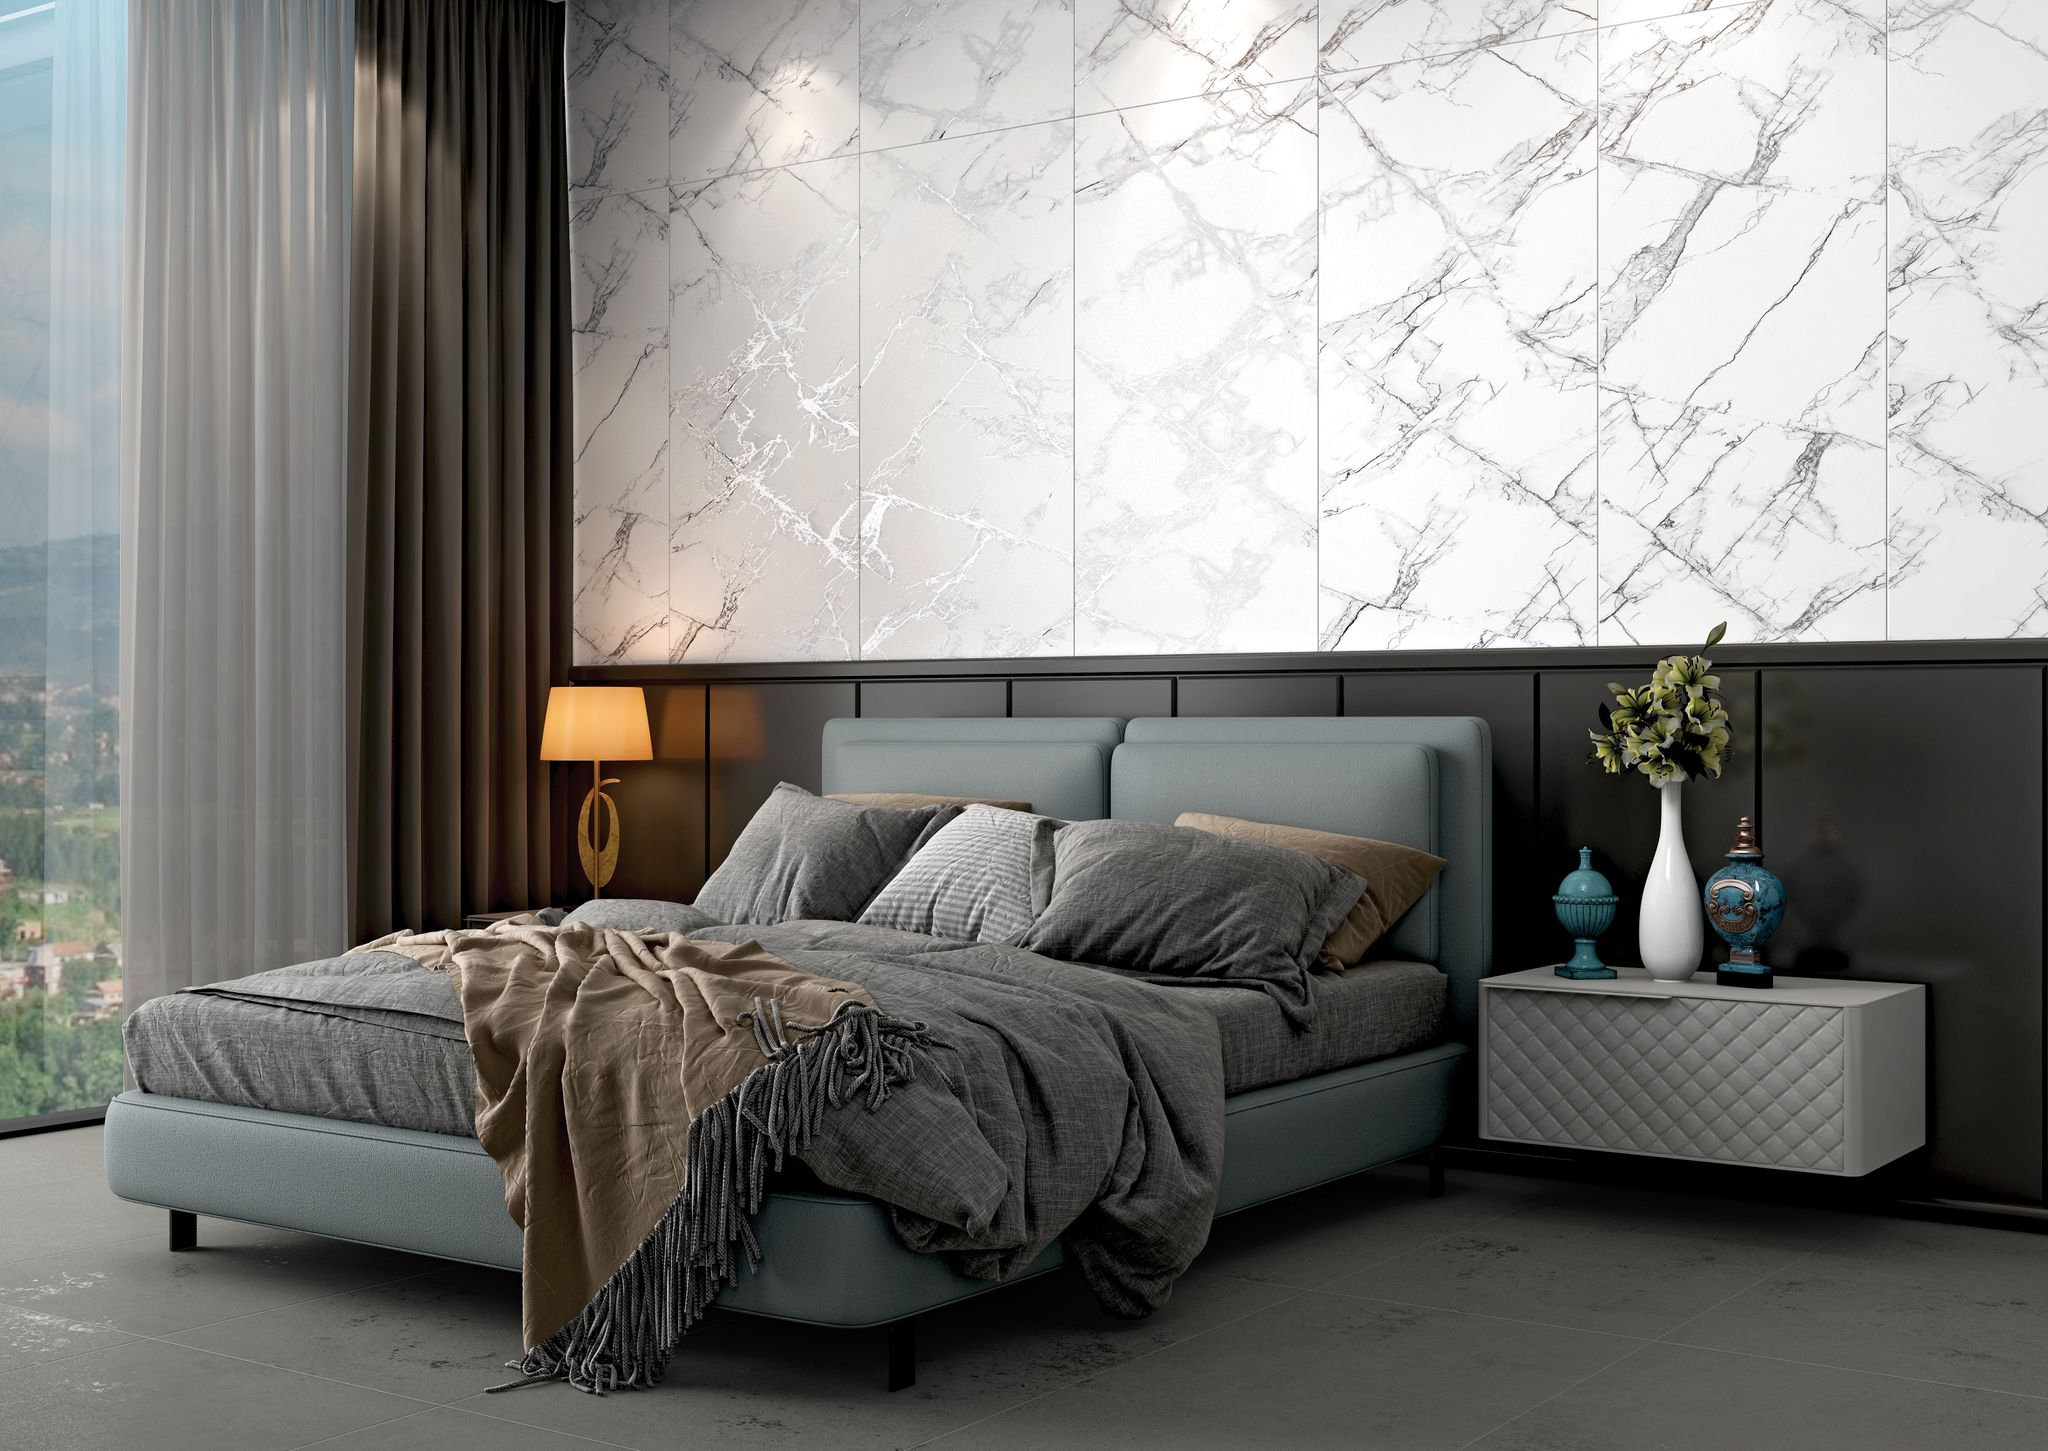 Treasure Ice White Marble 24x48 | Qualis Ceramica | Luxury Tile and Vinyl at affordable prices